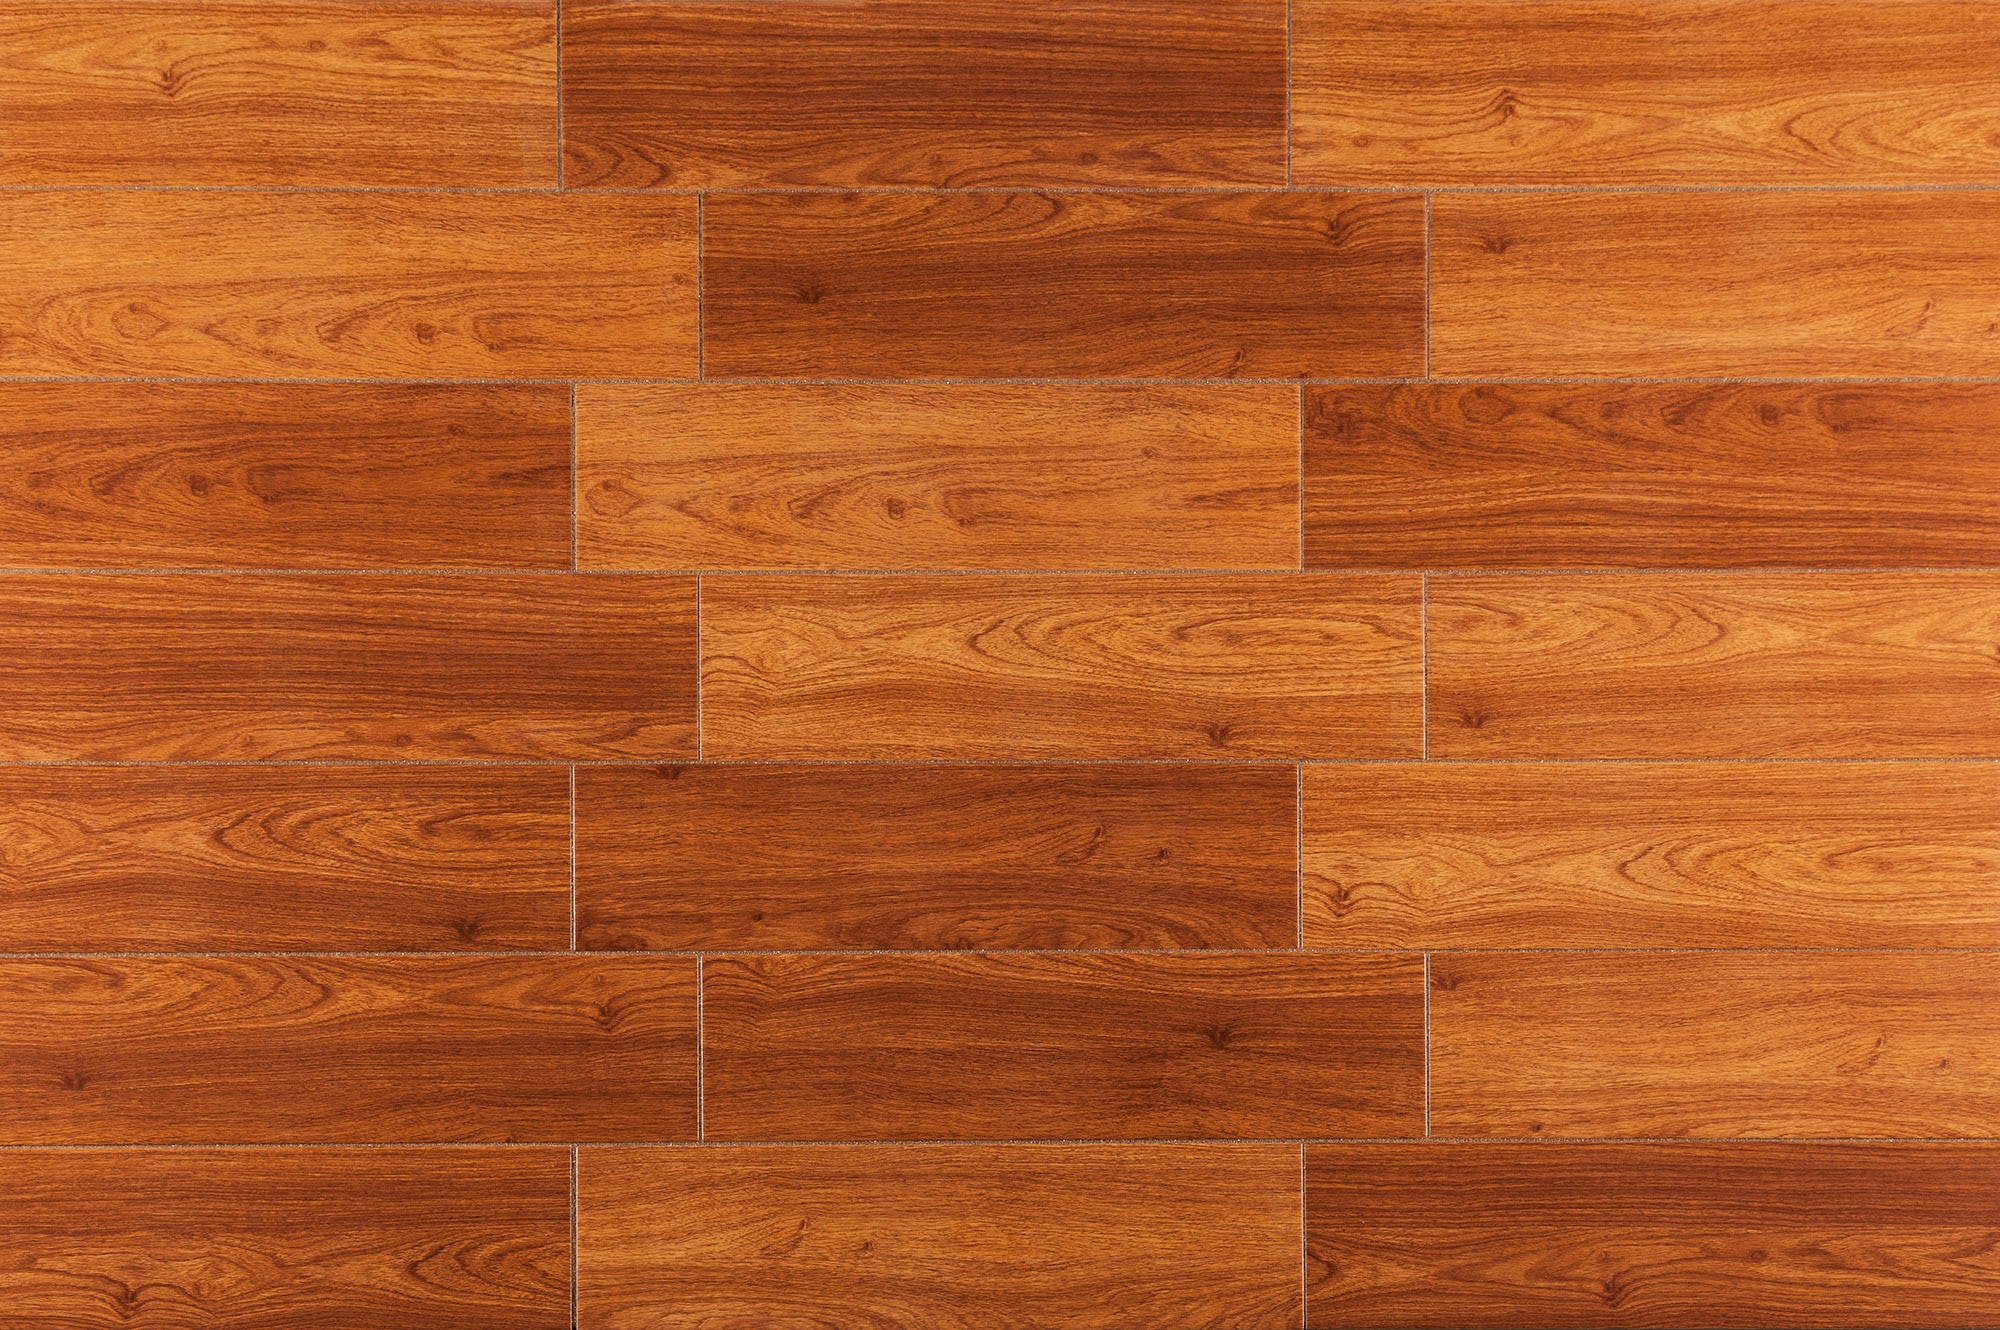 Jatoba Wood or Brazilian Cherry: Great for Exterior and 